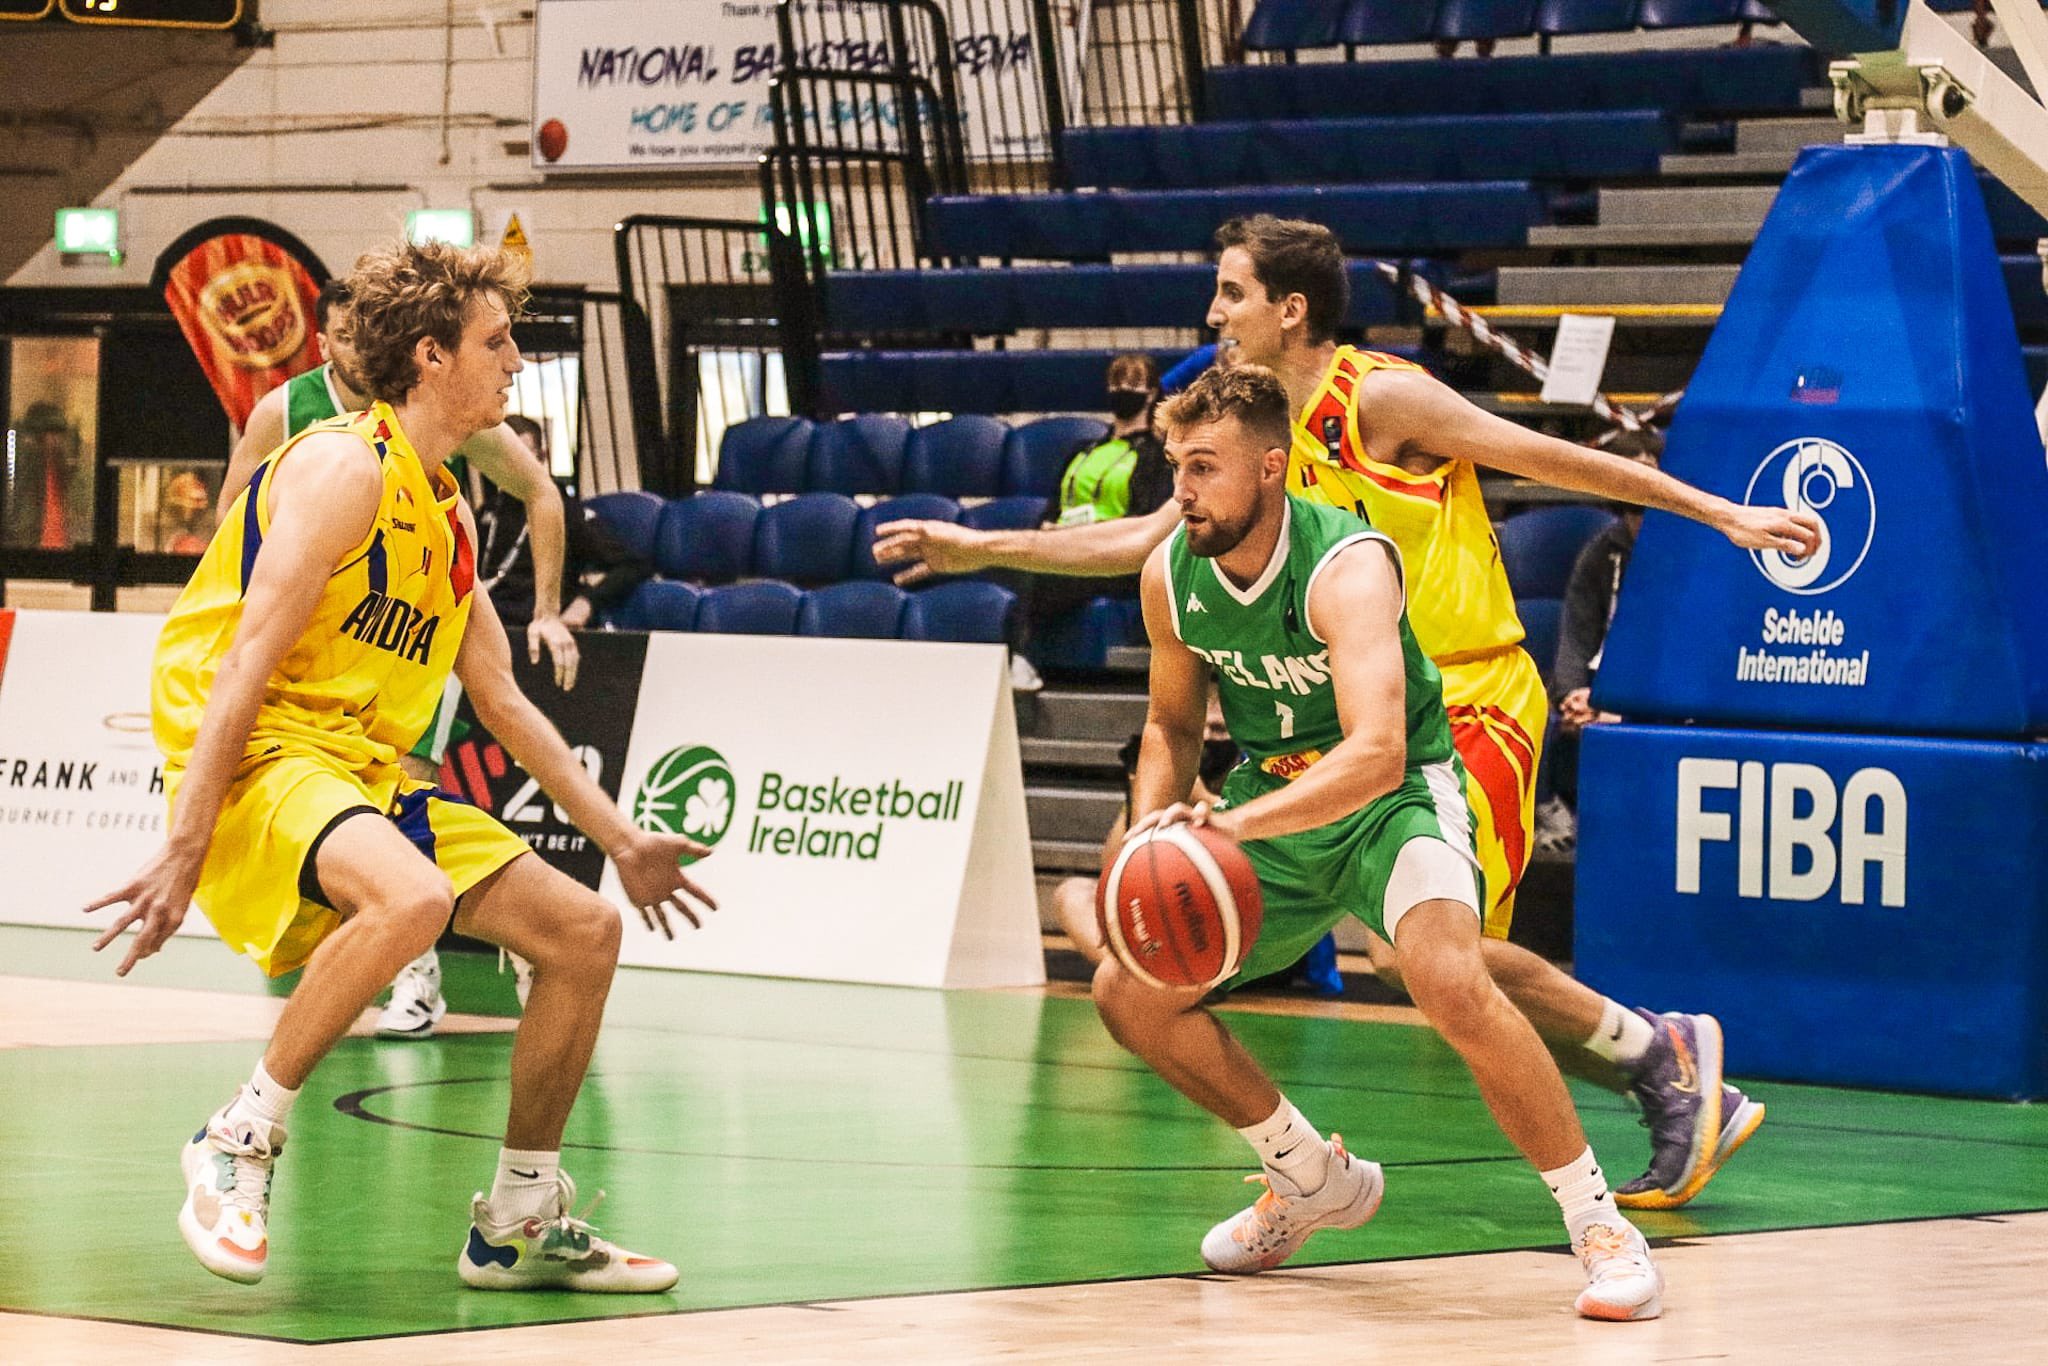 Ire;and's Sean Flood in action against Andorra at the 2021 FIBA European Championship for Small Countries